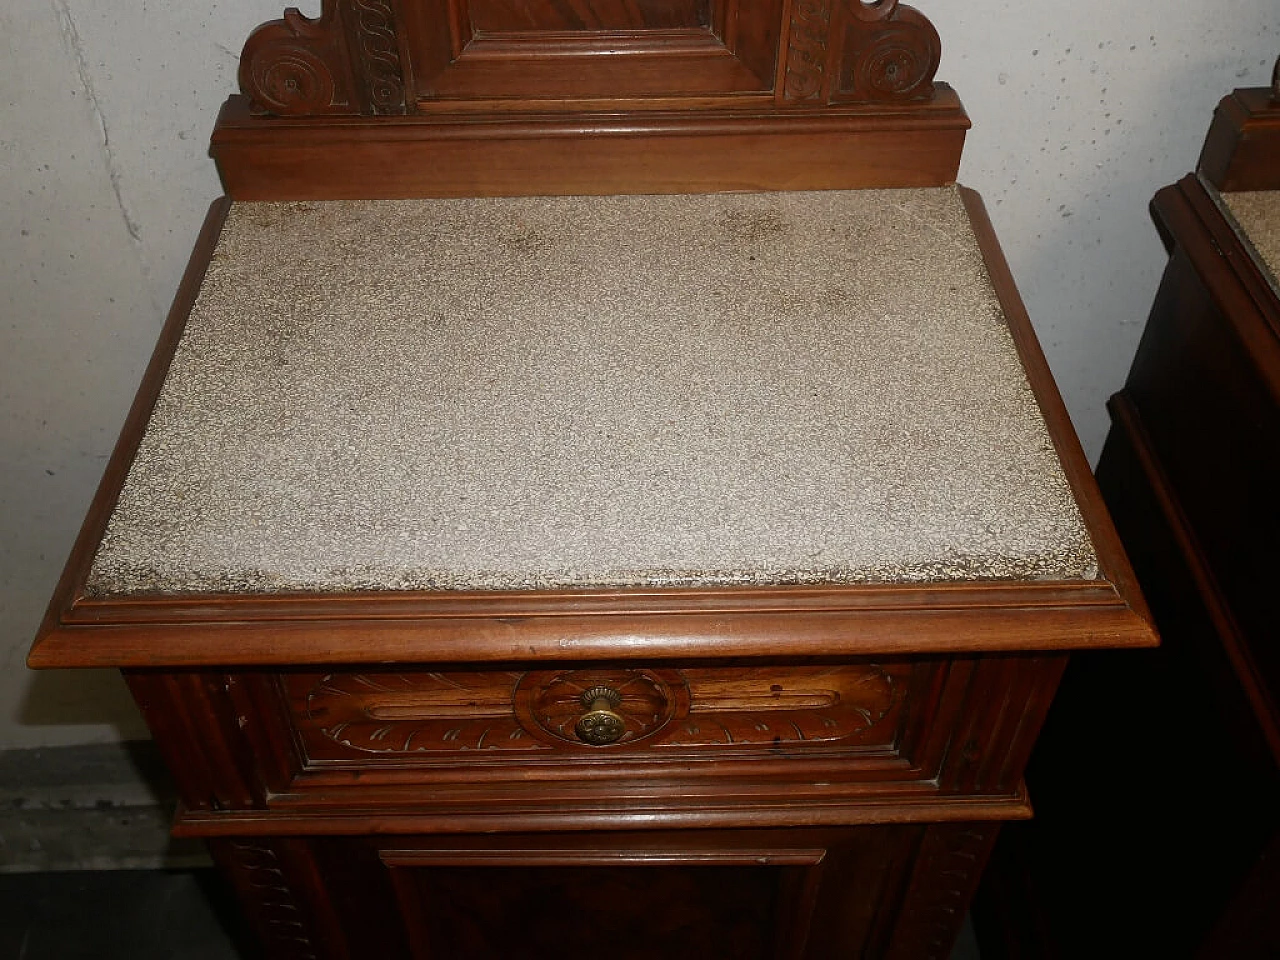 Pair of walnut bedside tables with grit top, early 20th century 1378226